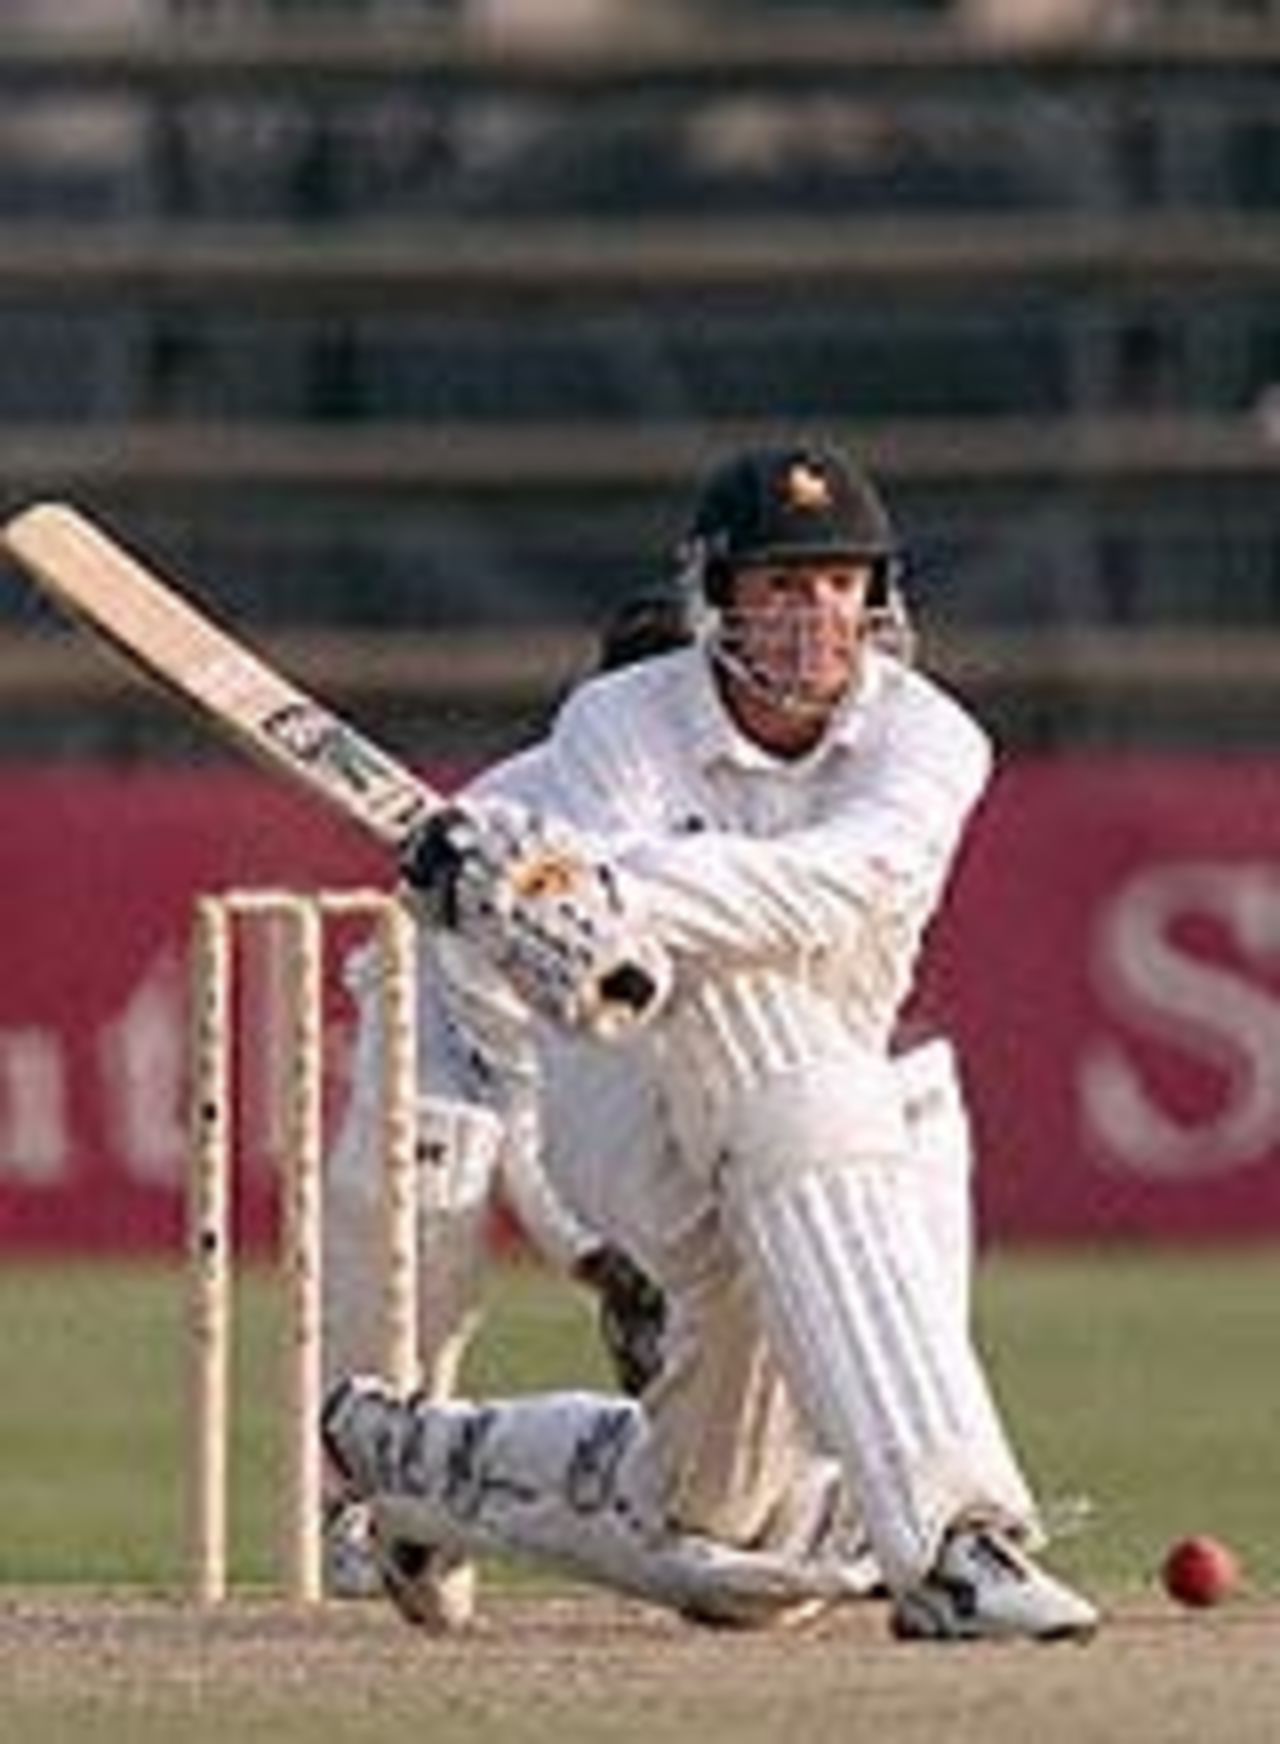 Andy Flower prepares a reverse sweep watched by Shaun Pollock, Ist Test South Africa v Zimbabwe, 7-11 September 2001, at Harare.